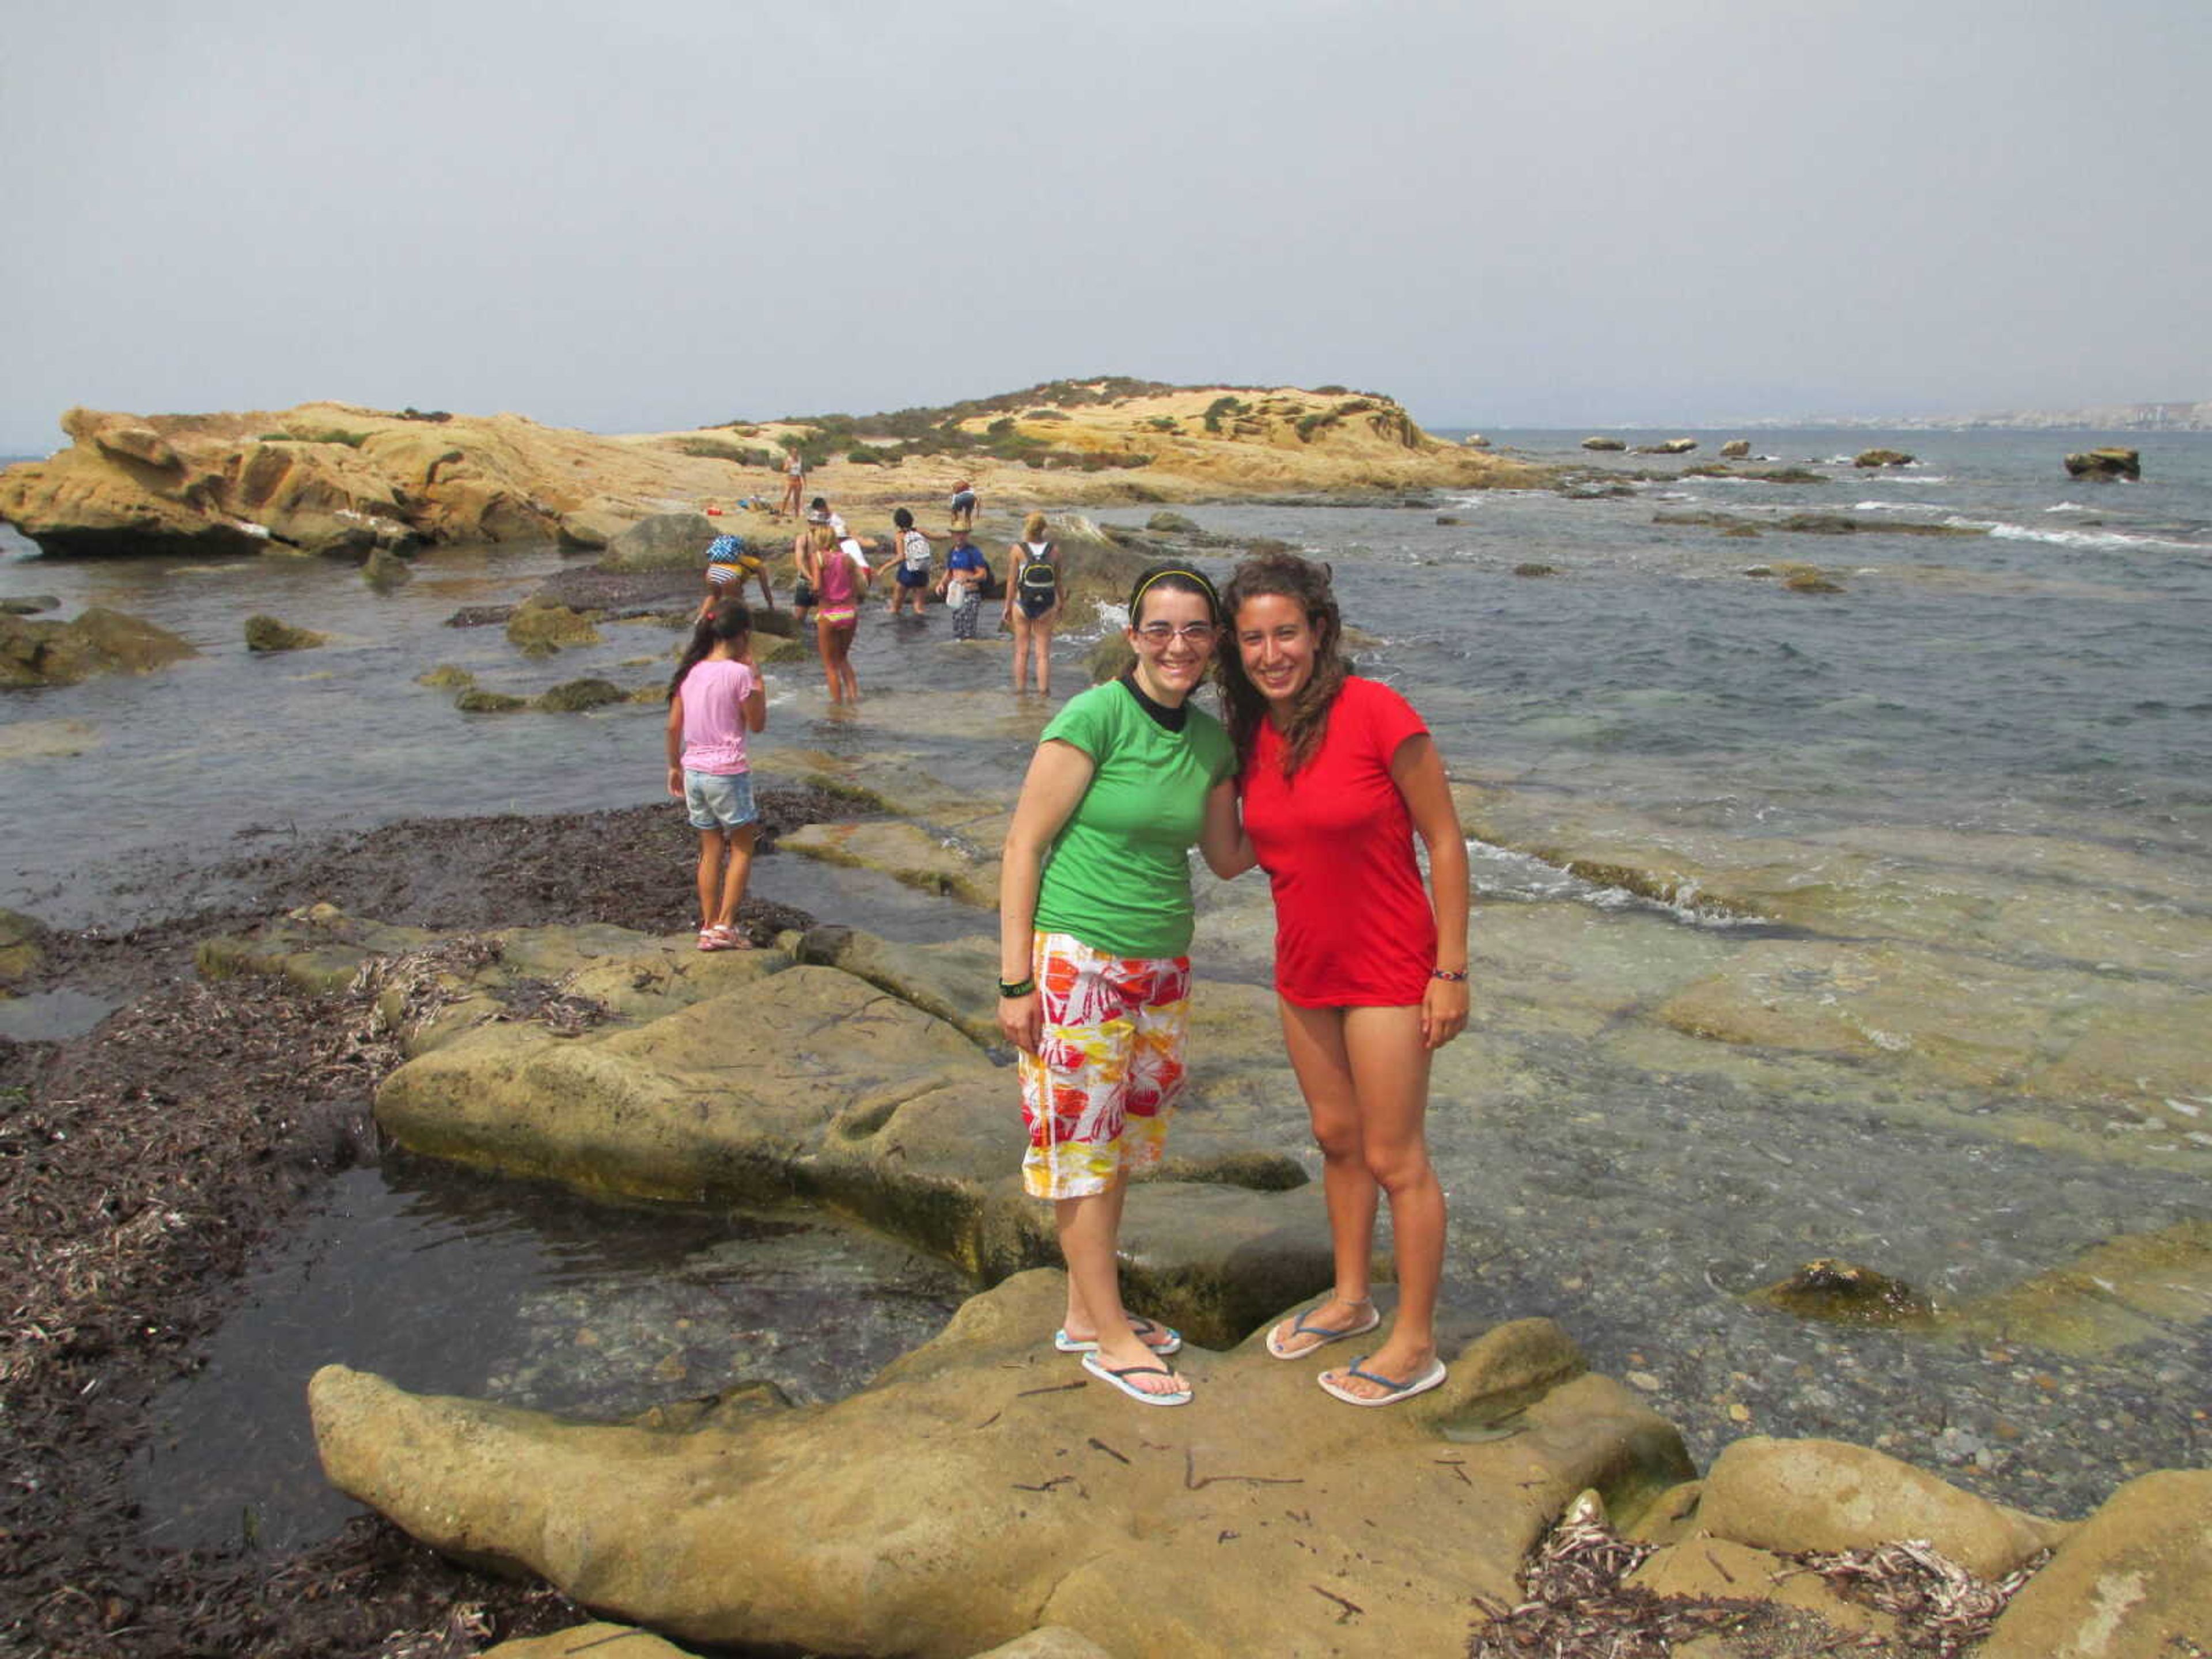 Amy Ahrens and a Spanish friend on an island off the coast of eastern Spain. Submitted photo